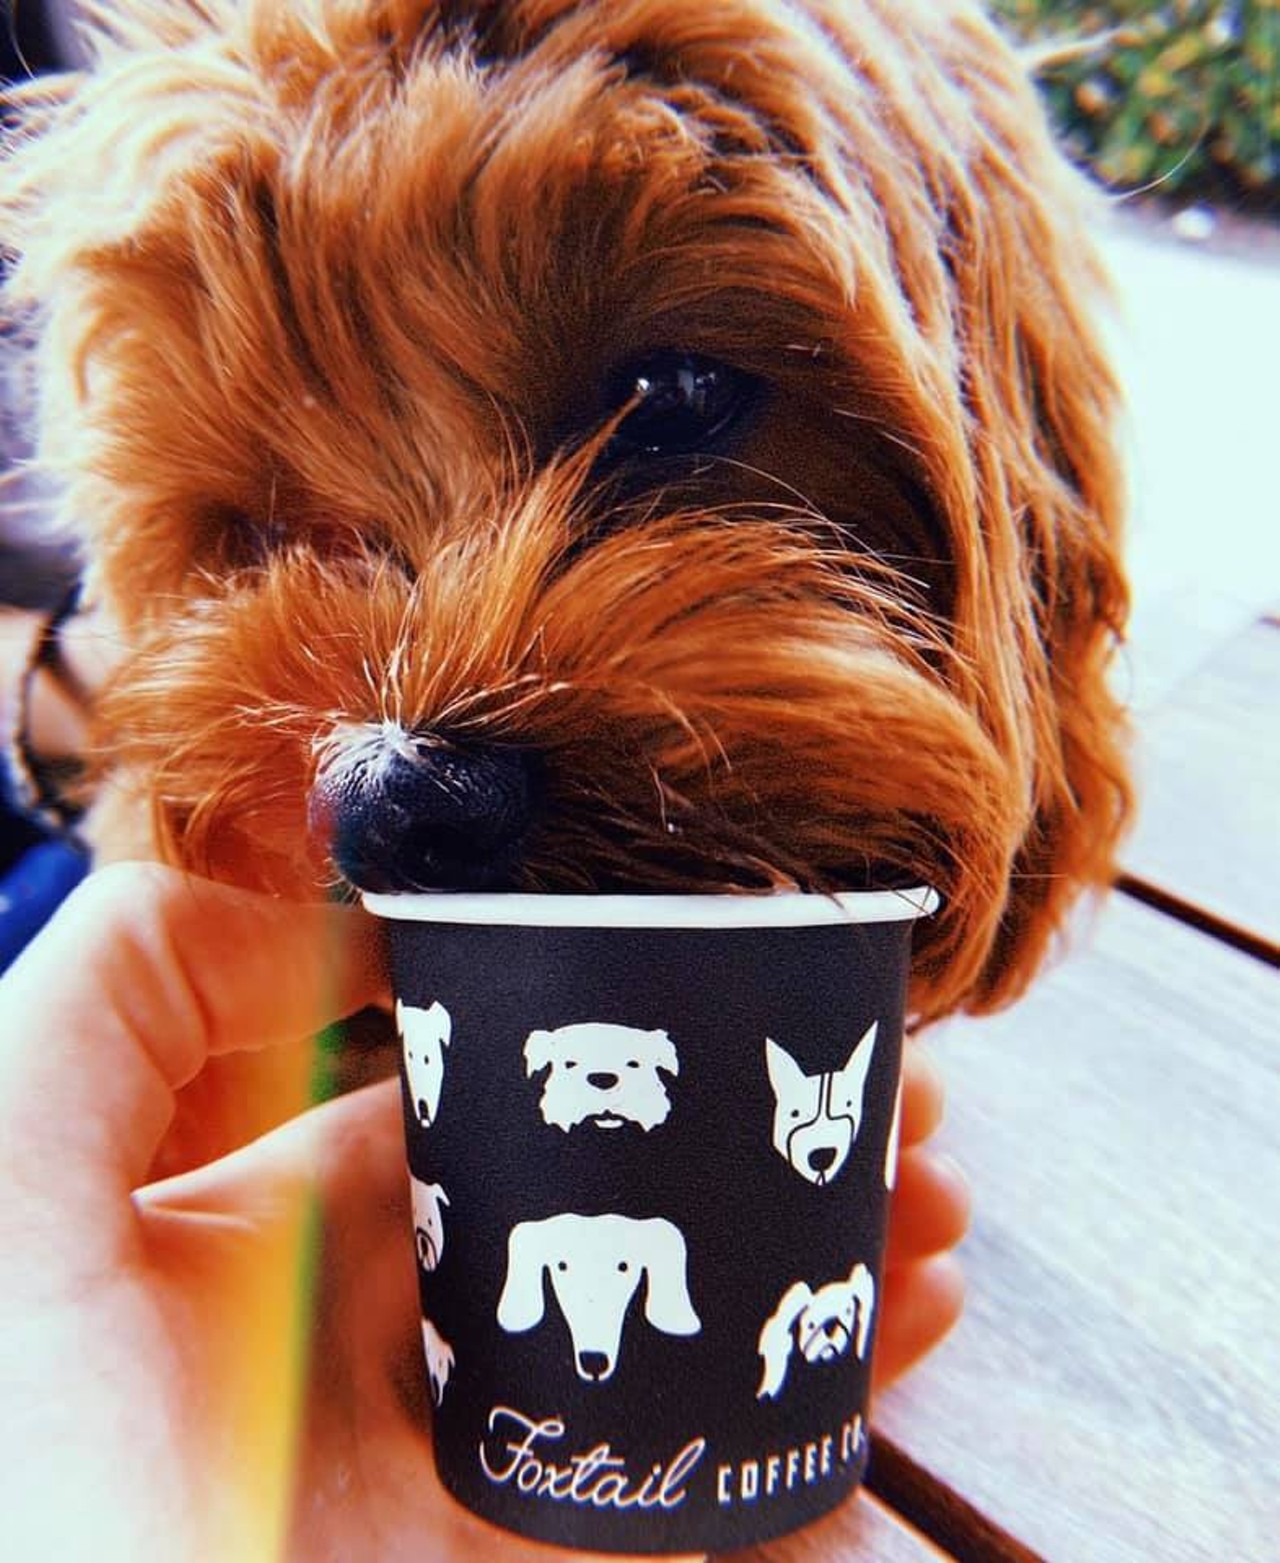 Foxtail Coffee Co 
Locations across Central Florida
Foxtail Coffee makes its product with organic, Arabica coffee and is well known in the Orlando area. Now they are offering puppaccinos at the coffee bars and you can bring your pup inside. 
Photo via Foxtail Coffee Co./Facebook